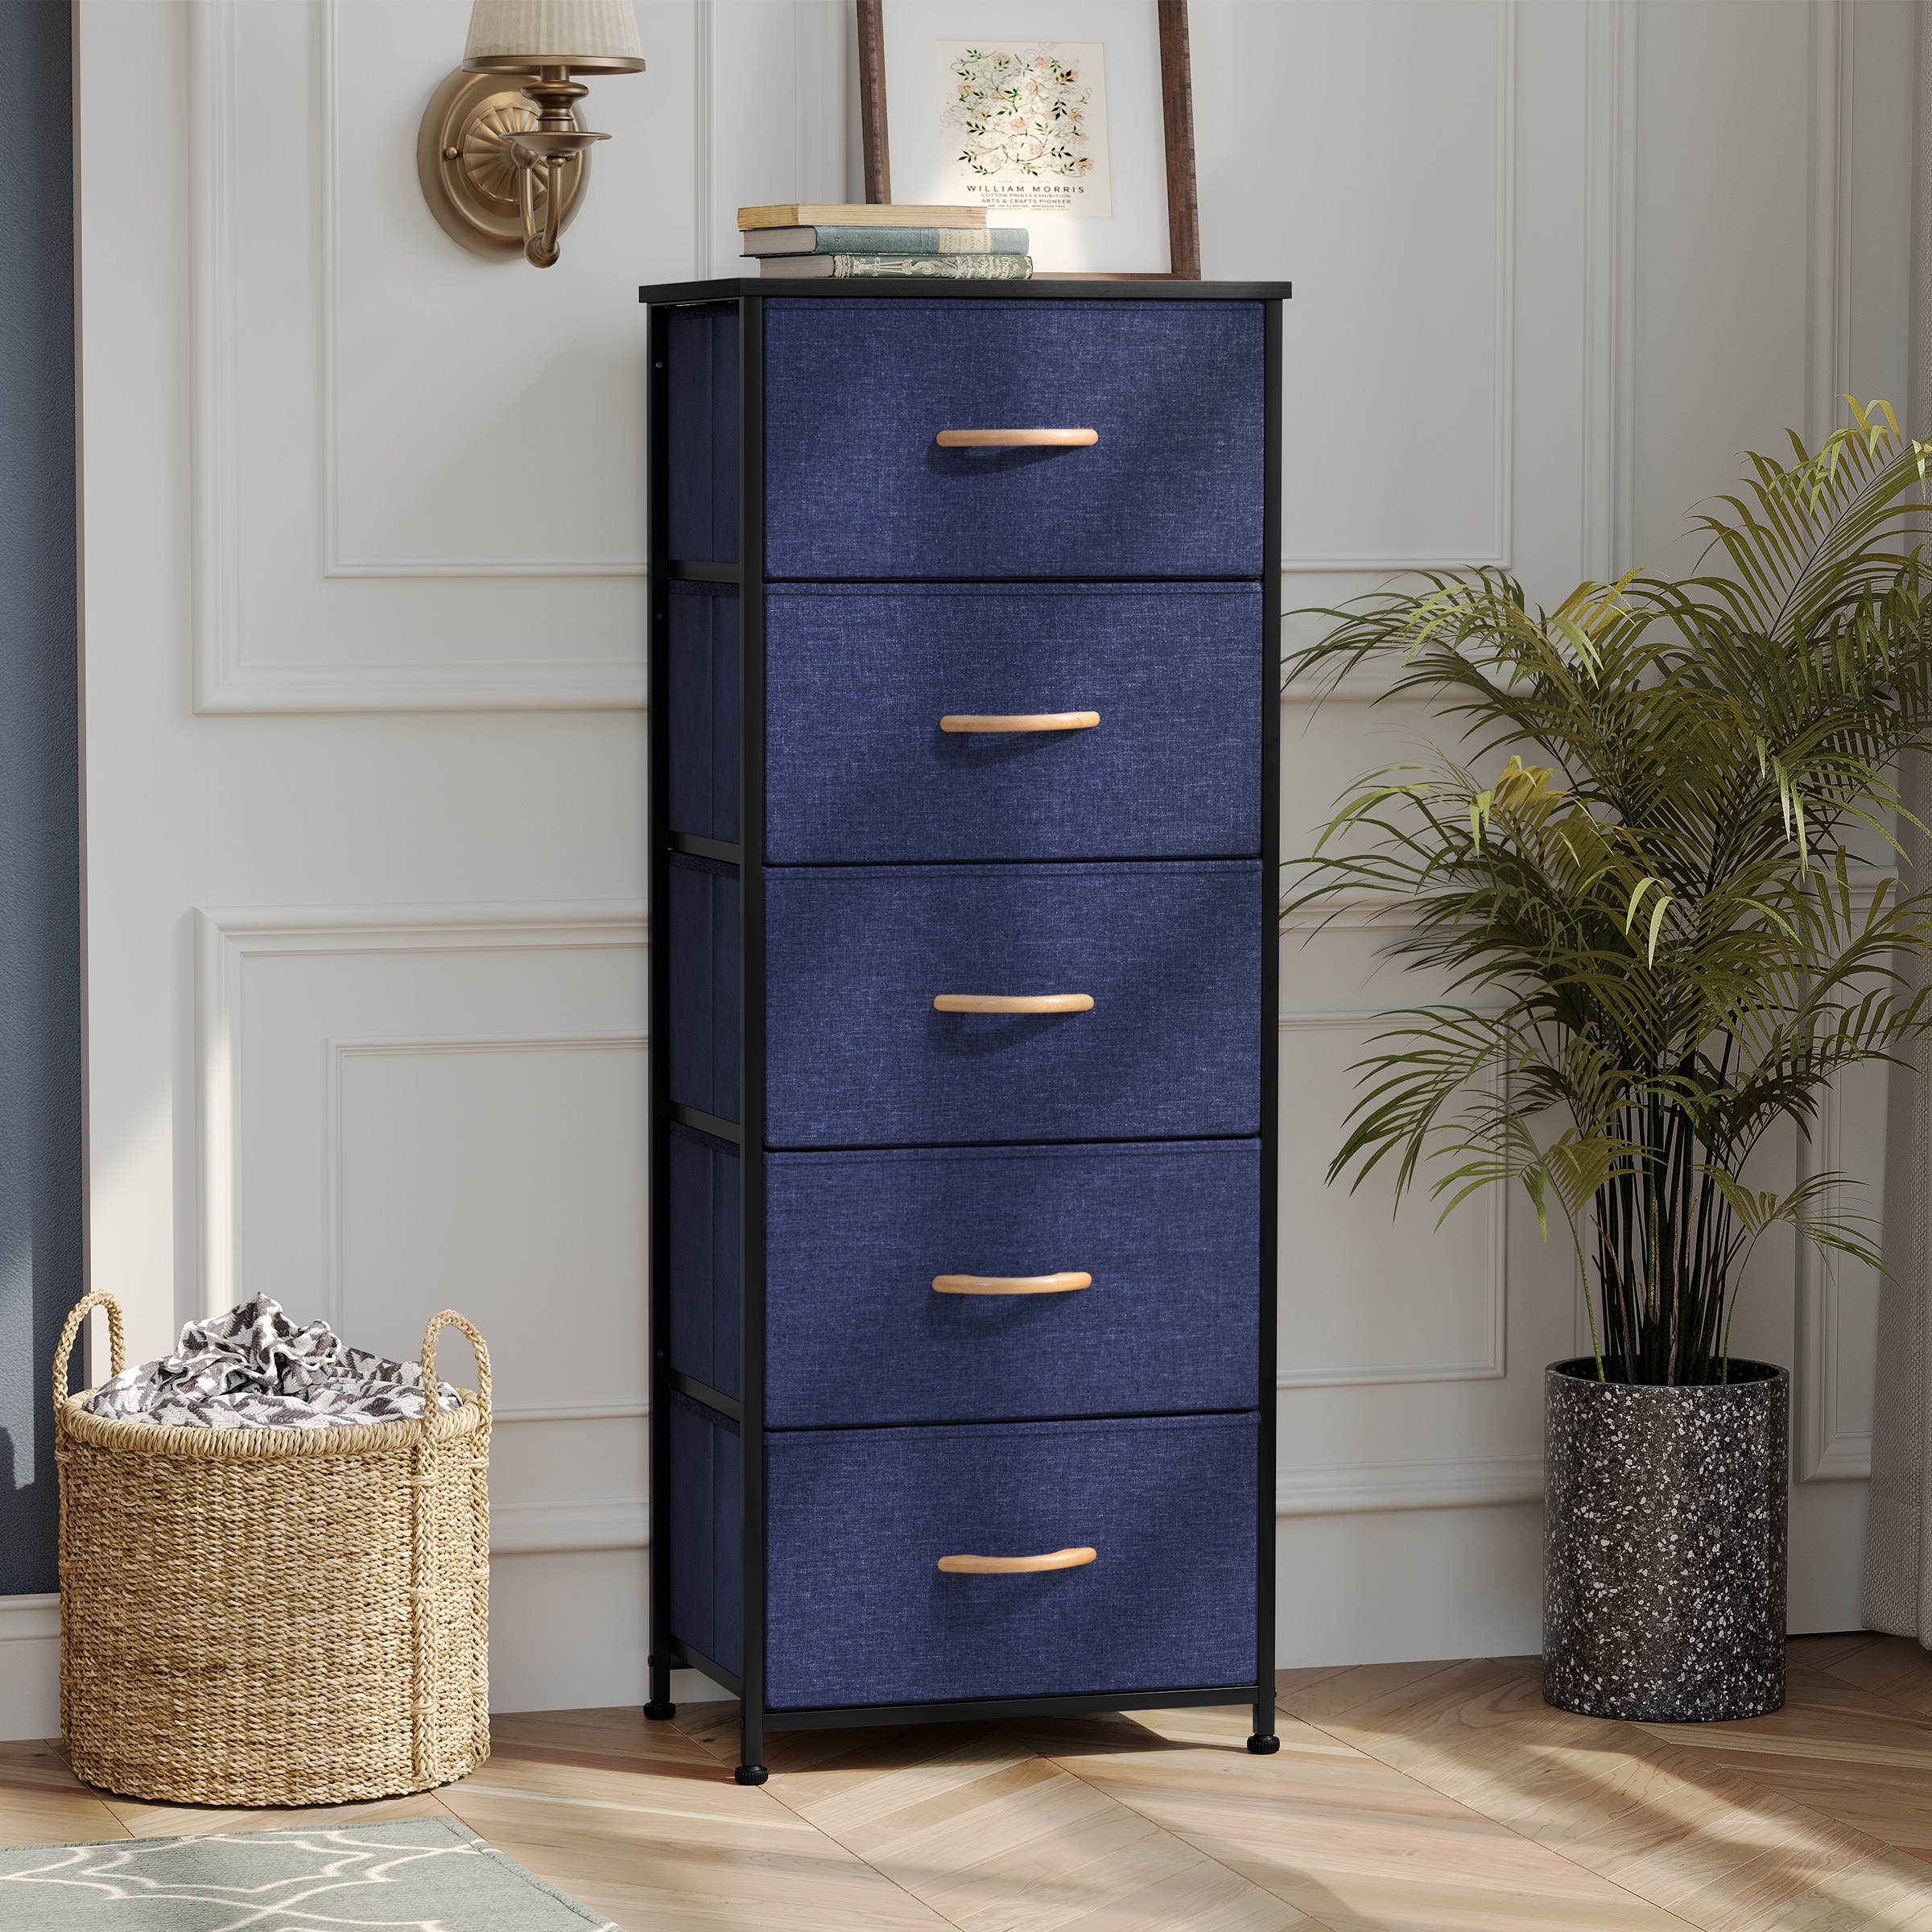 https://ak1.ostkcdn.com/images/products/is/images/direct/0fbfc4af29d12e12e85d7db1289d7979f6f8ab0a/Pellebant-5-Drawers-Vertical-Storage-Tower-Organizer.jpg